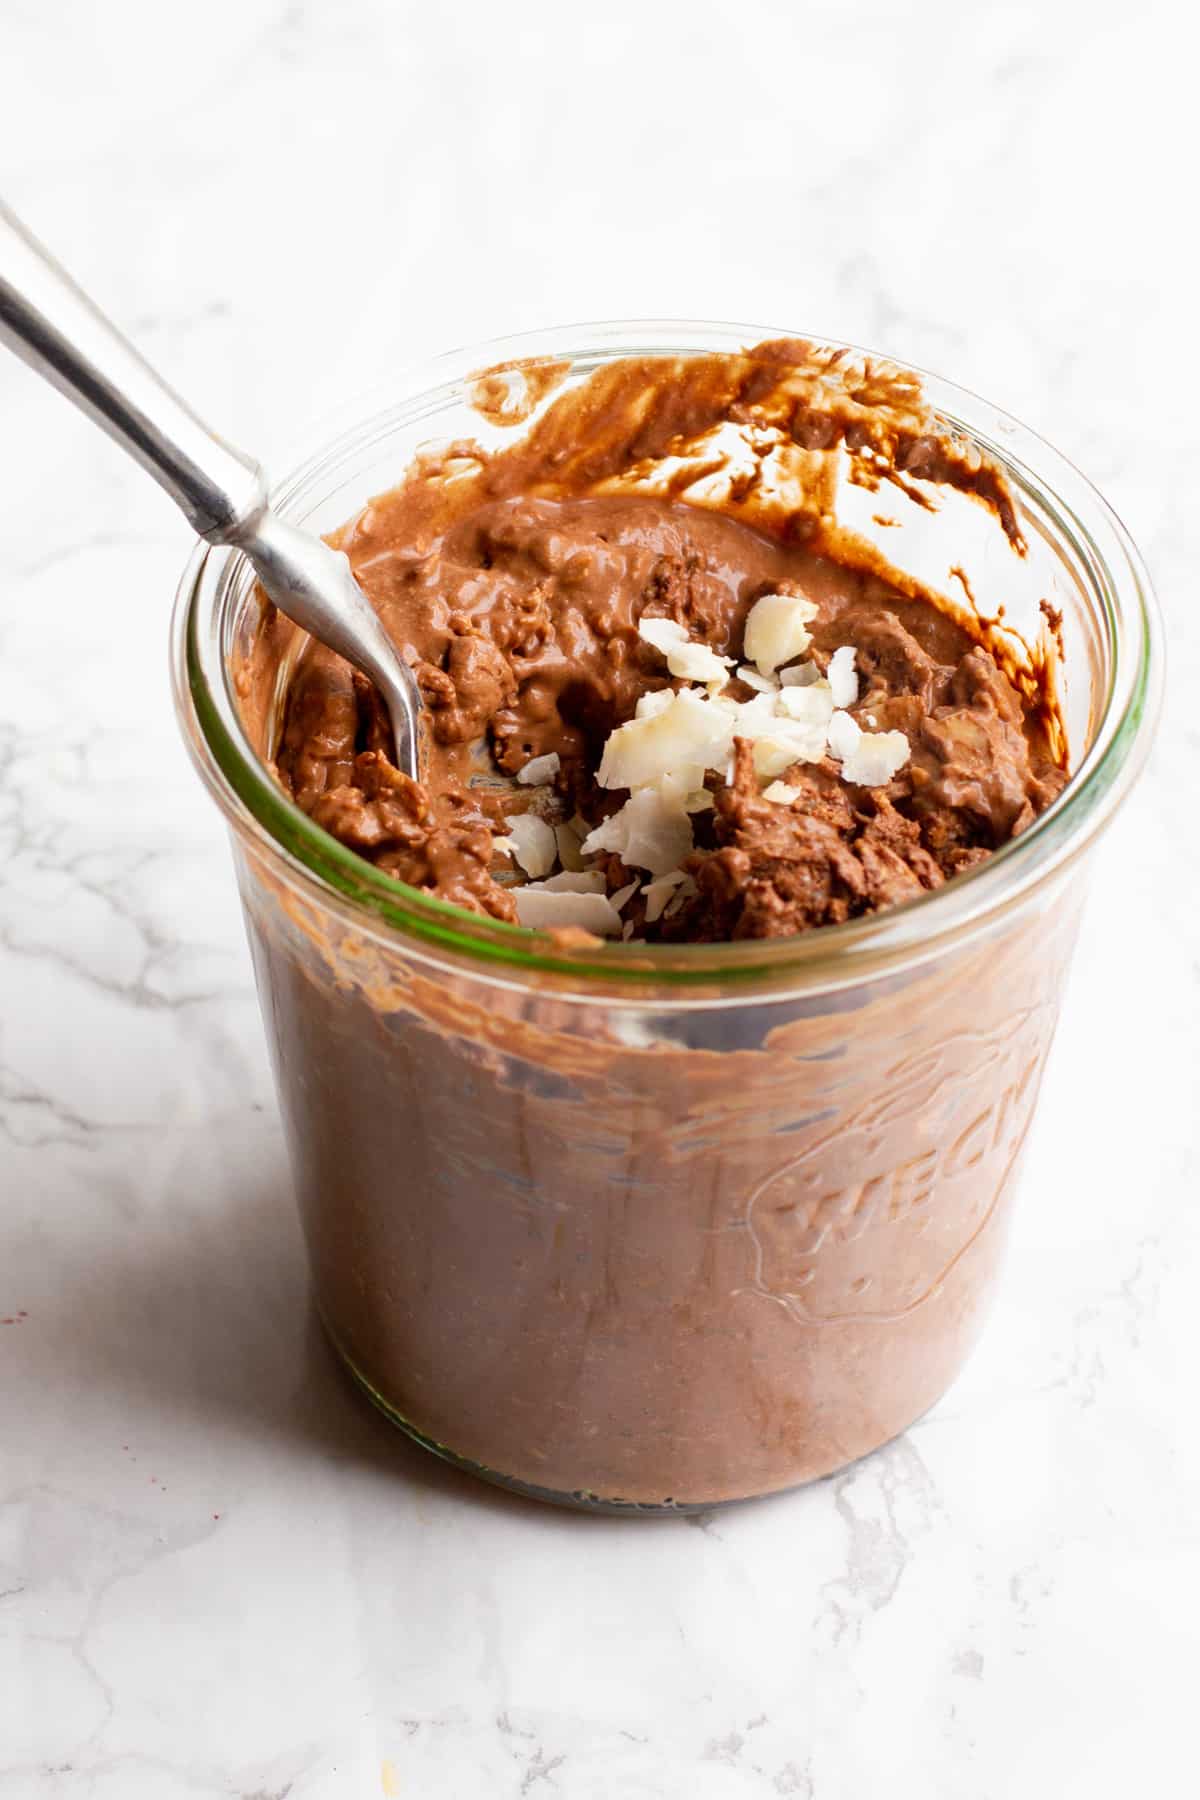 How to Make Healthy Coconut Chocolate Overnight Oats